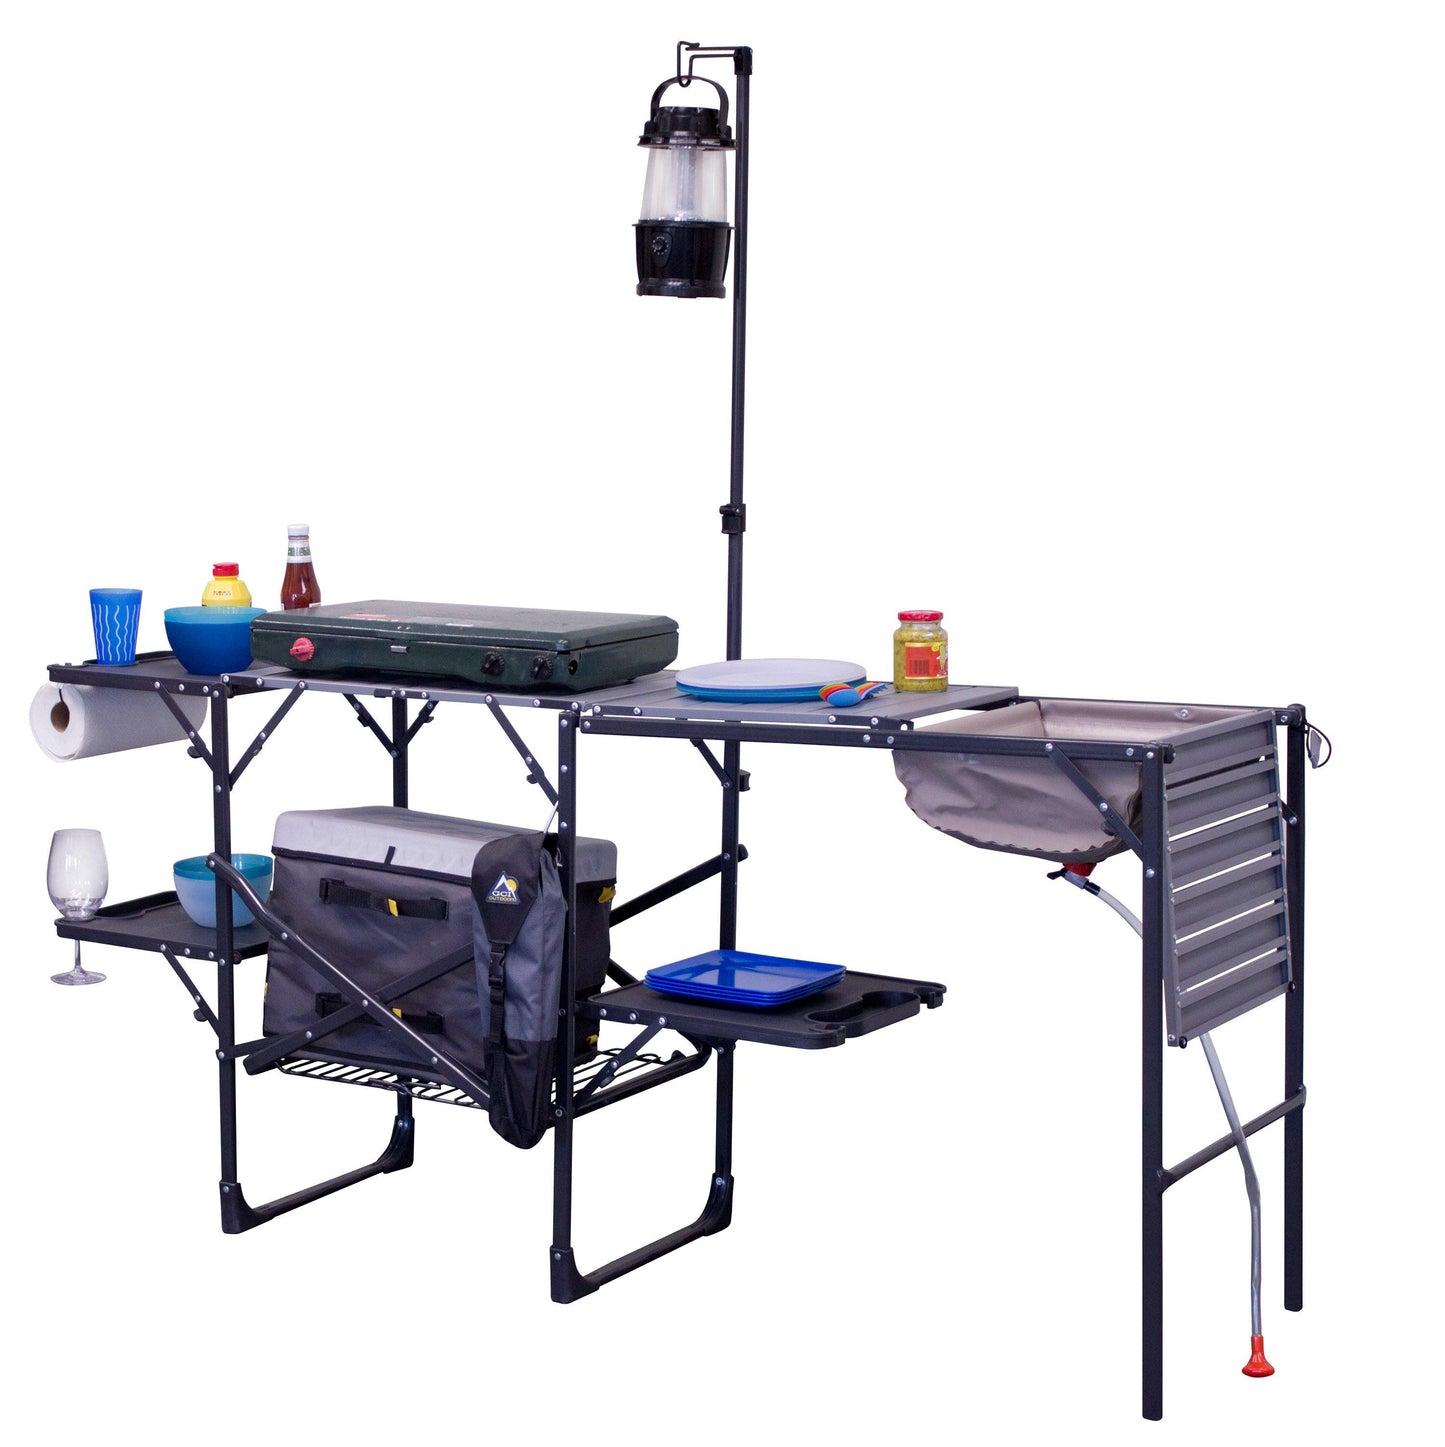 GCI Outdoor Master Cook Station Portable Camp Kitchen Outdoor Folding Table, Black Chrome